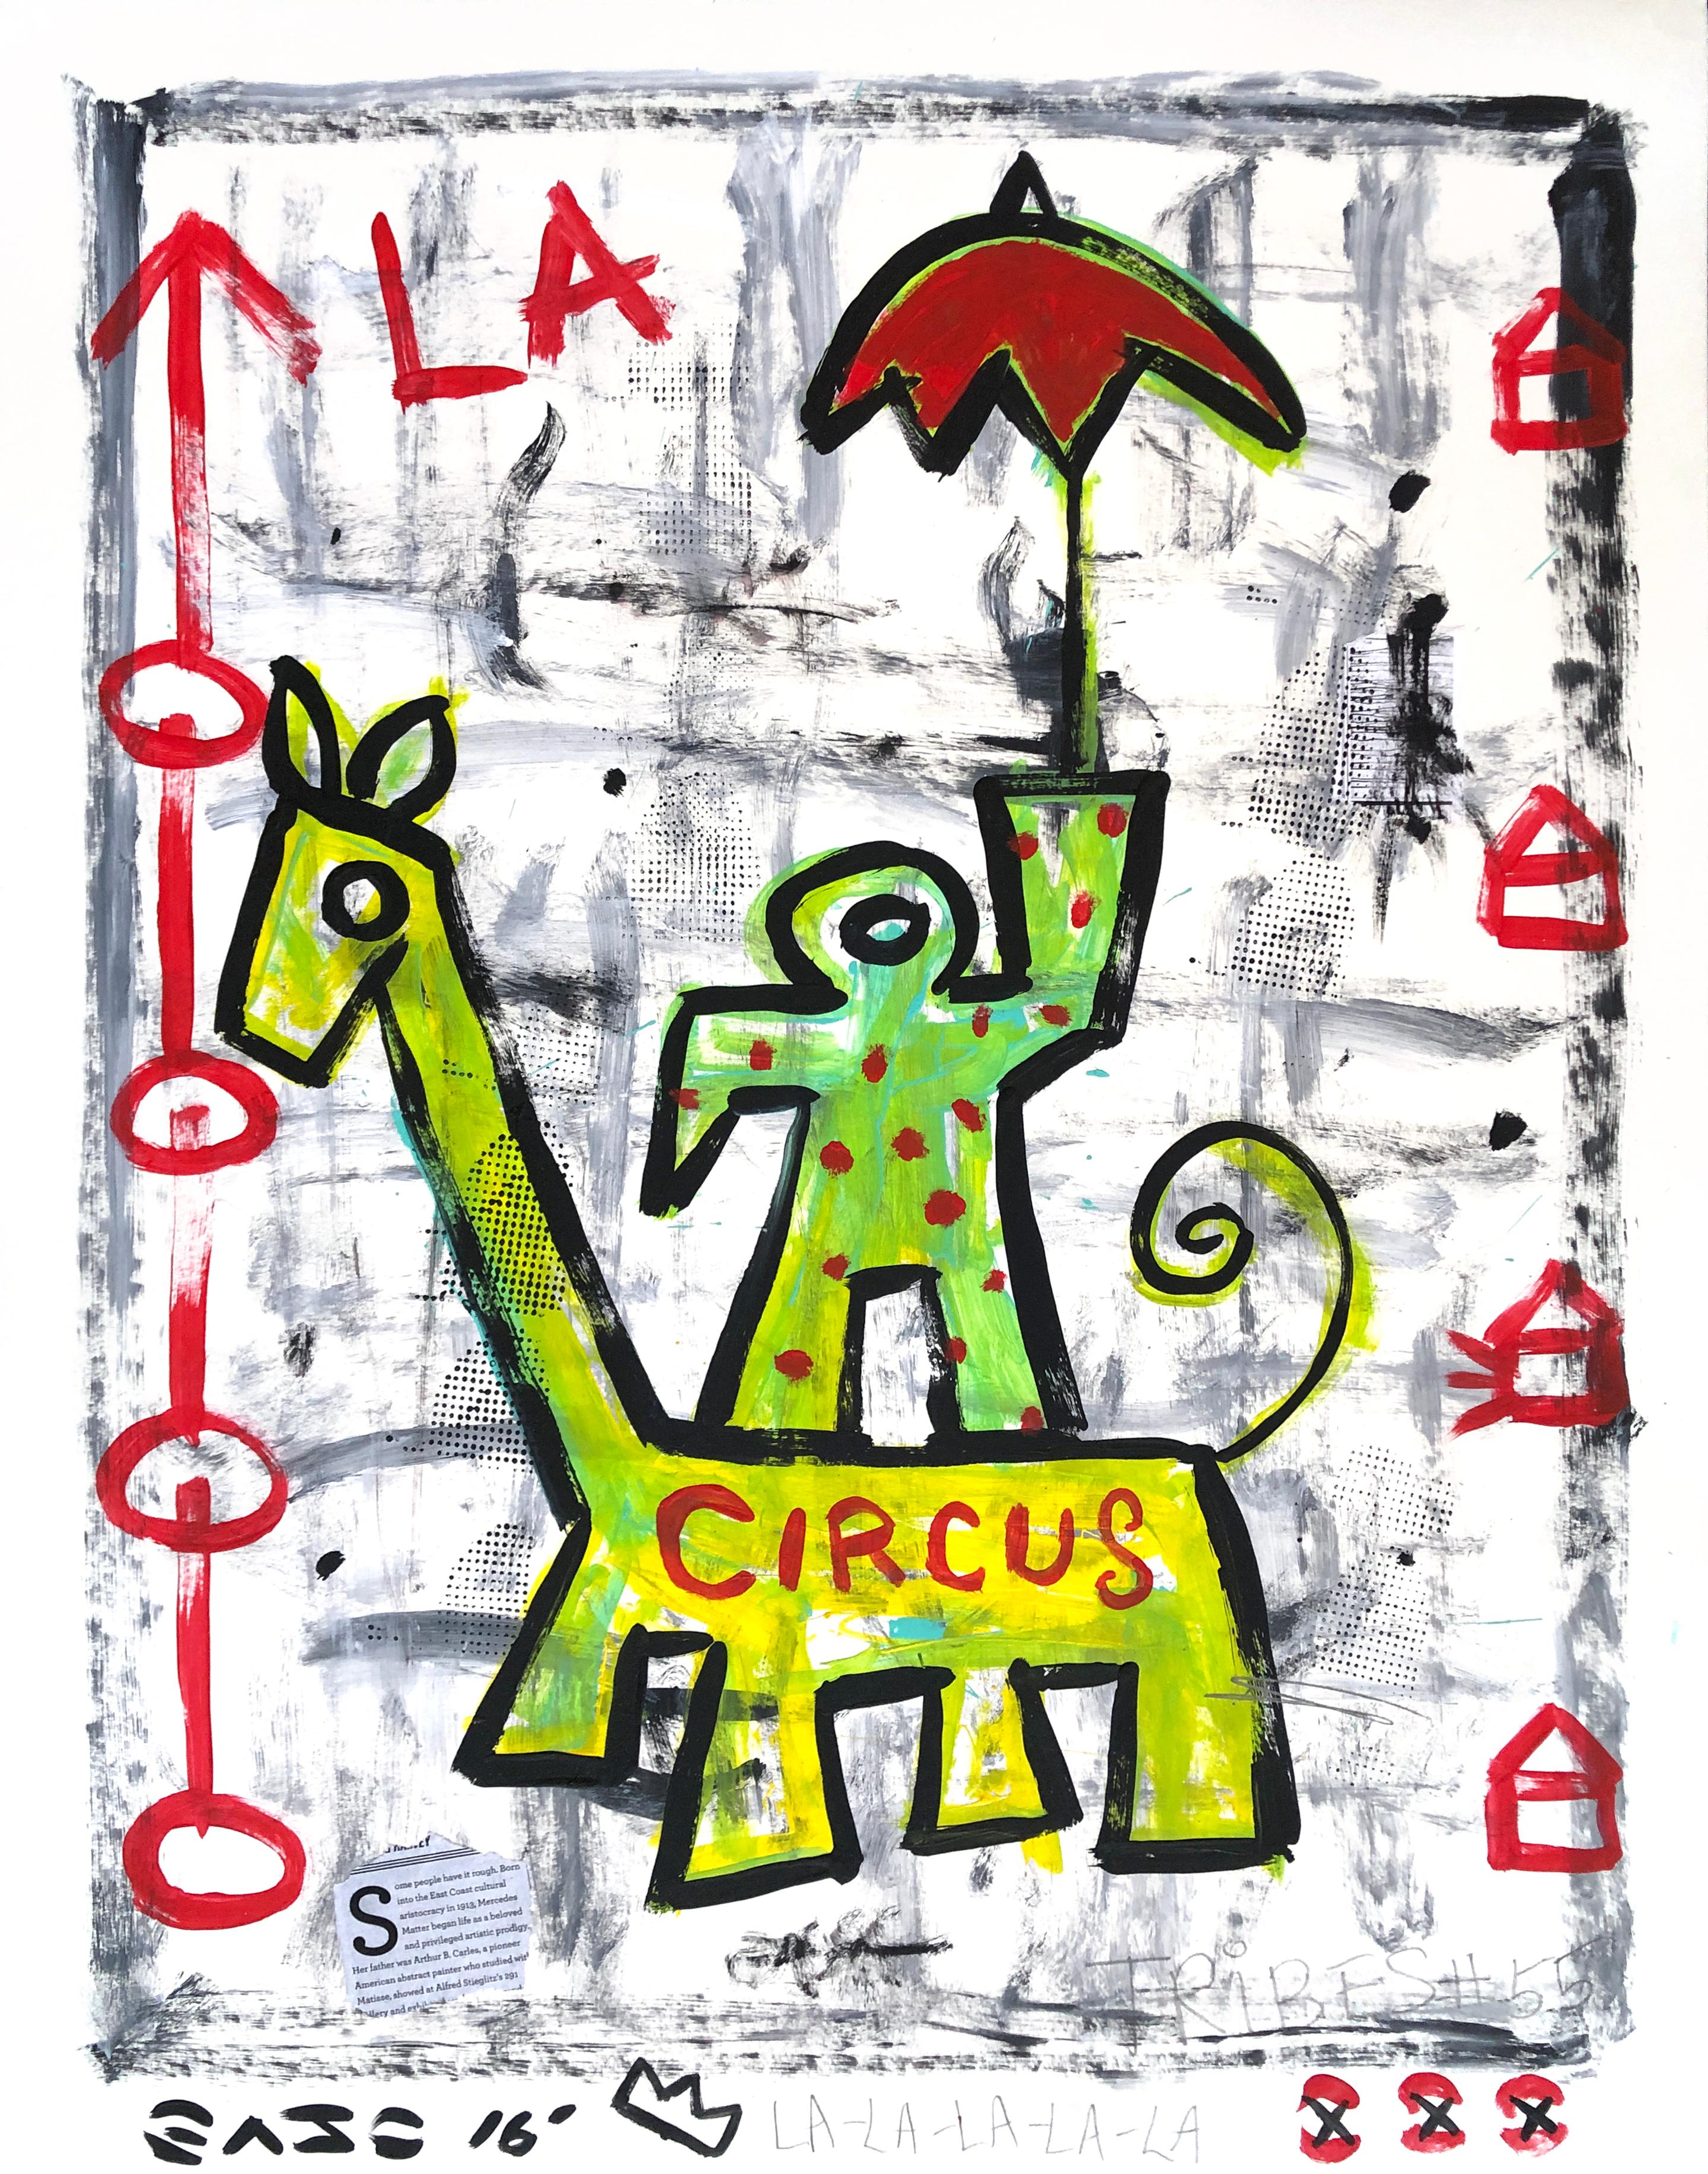 "The New LA Circus" Cubist Inspired Pop Art Contemporary by Gary John